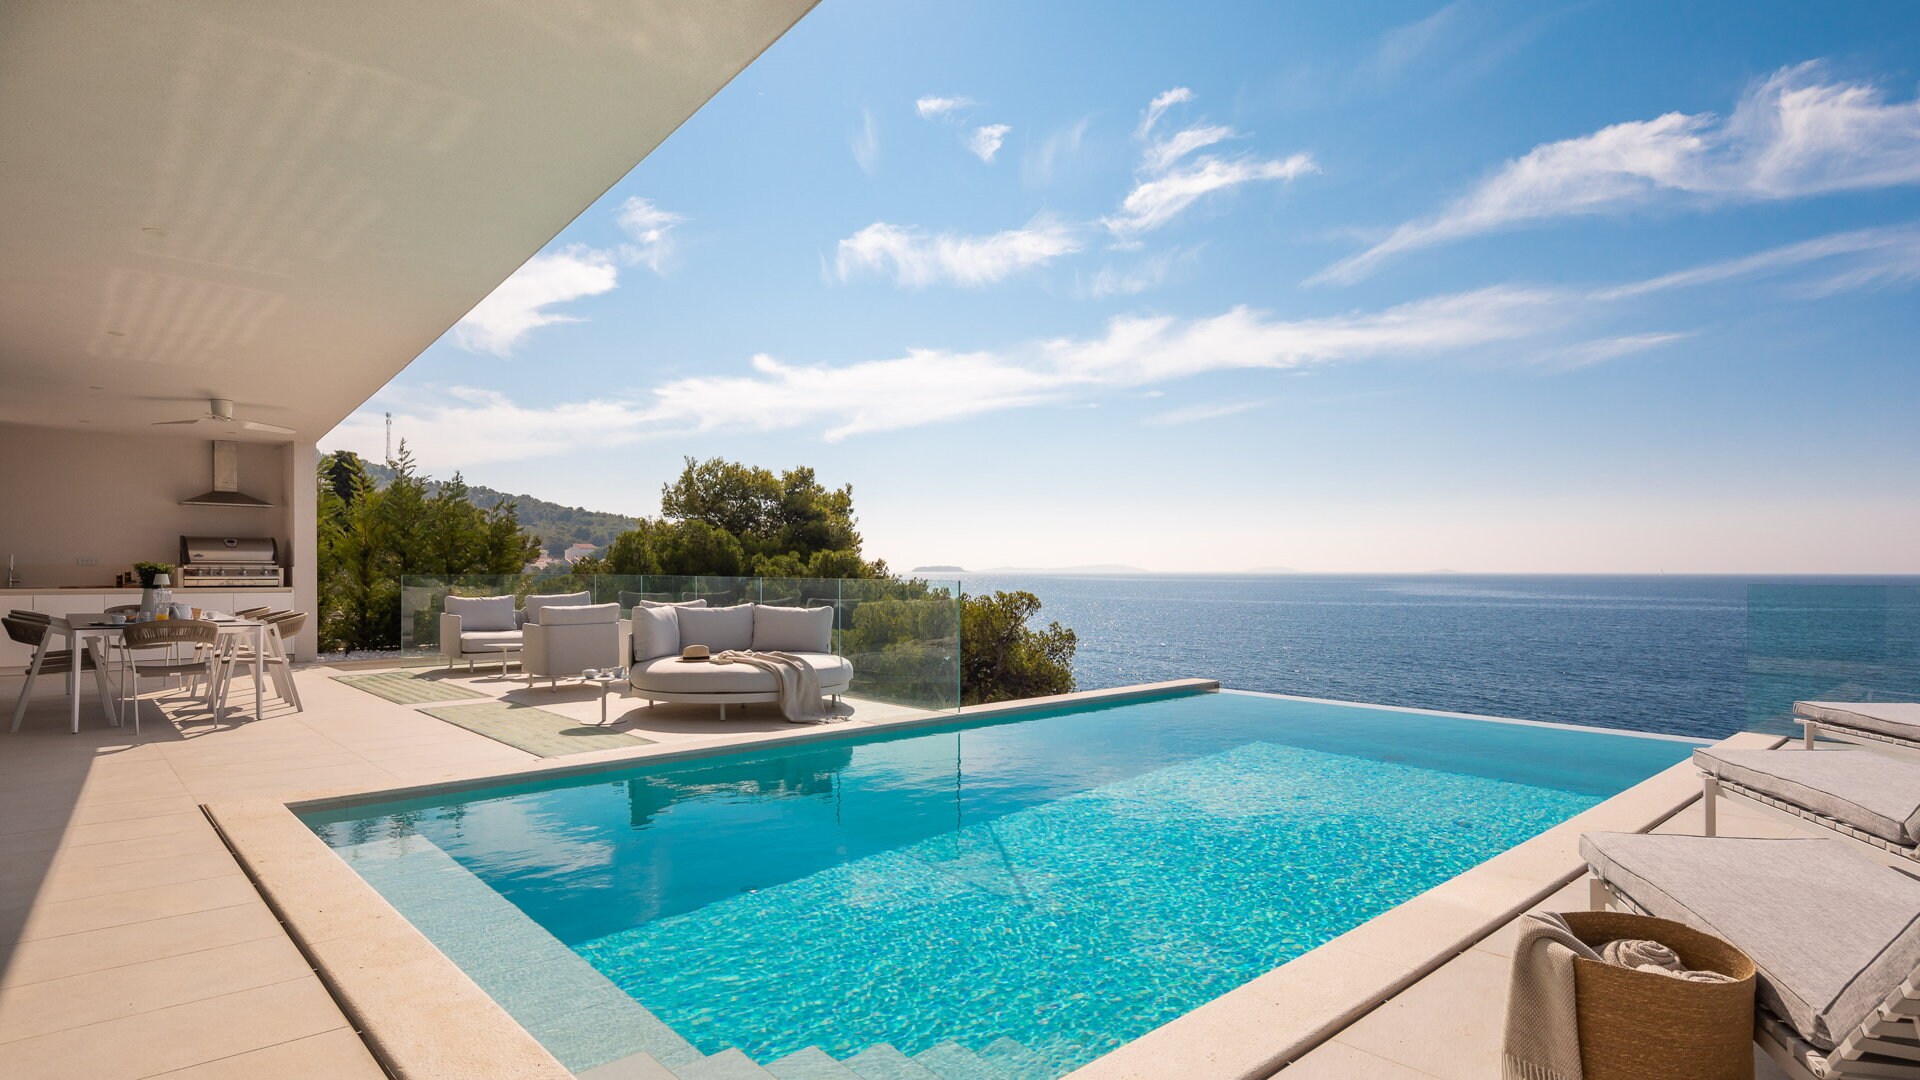 Property Image 2 - Villa Dream Pearl with Heated Pool